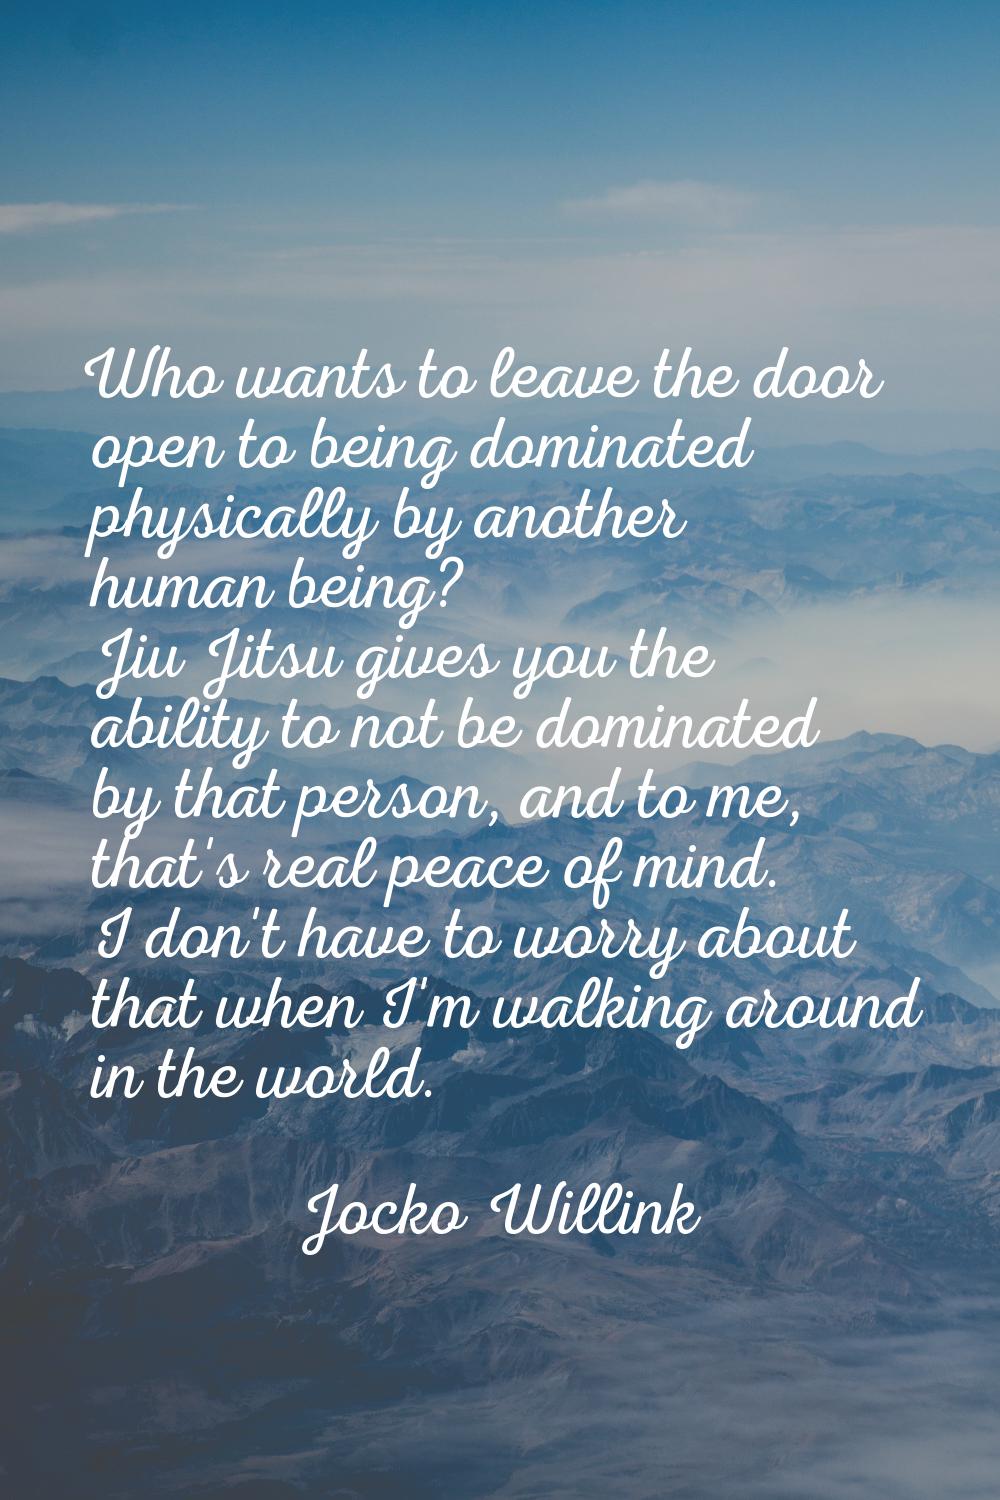 Who wants to leave the door open to being dominated physically by another human being? Jiu Jitsu gi